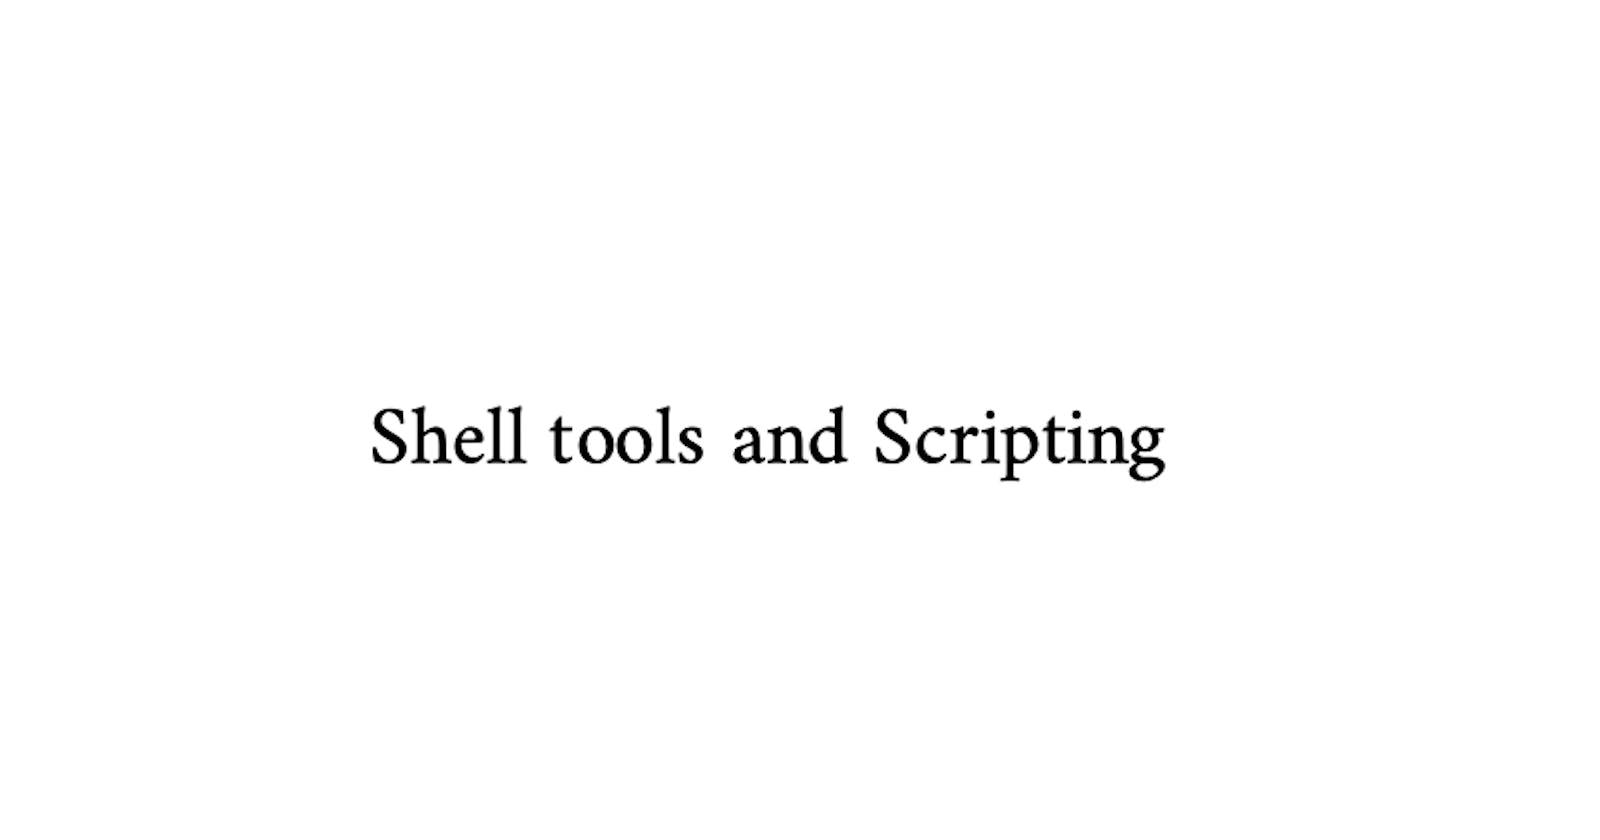 Shell tools and scripting